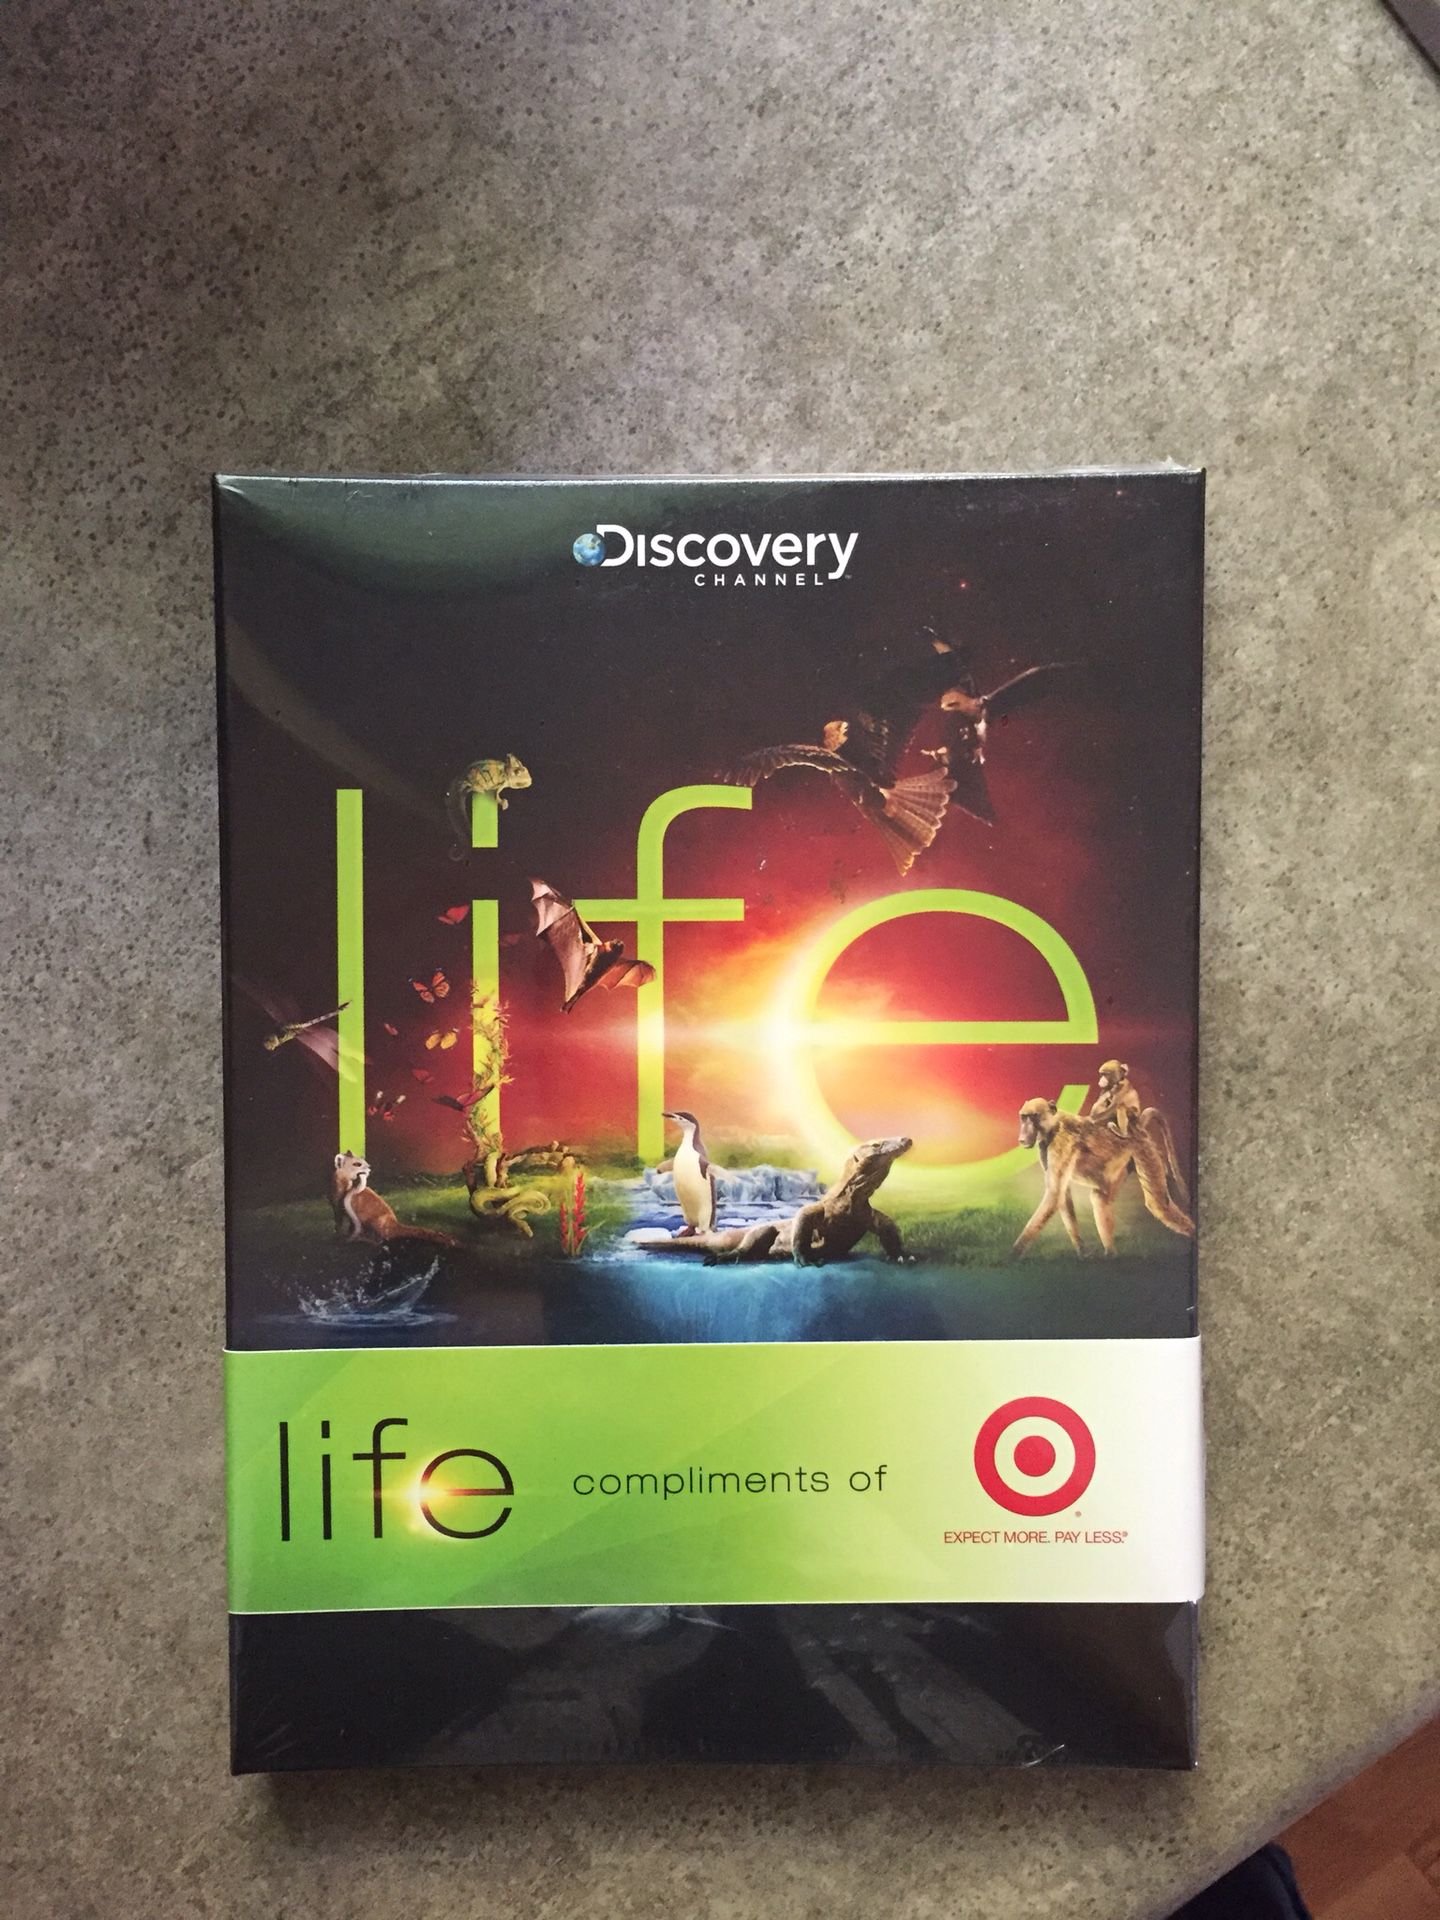 Discovery channel dvd